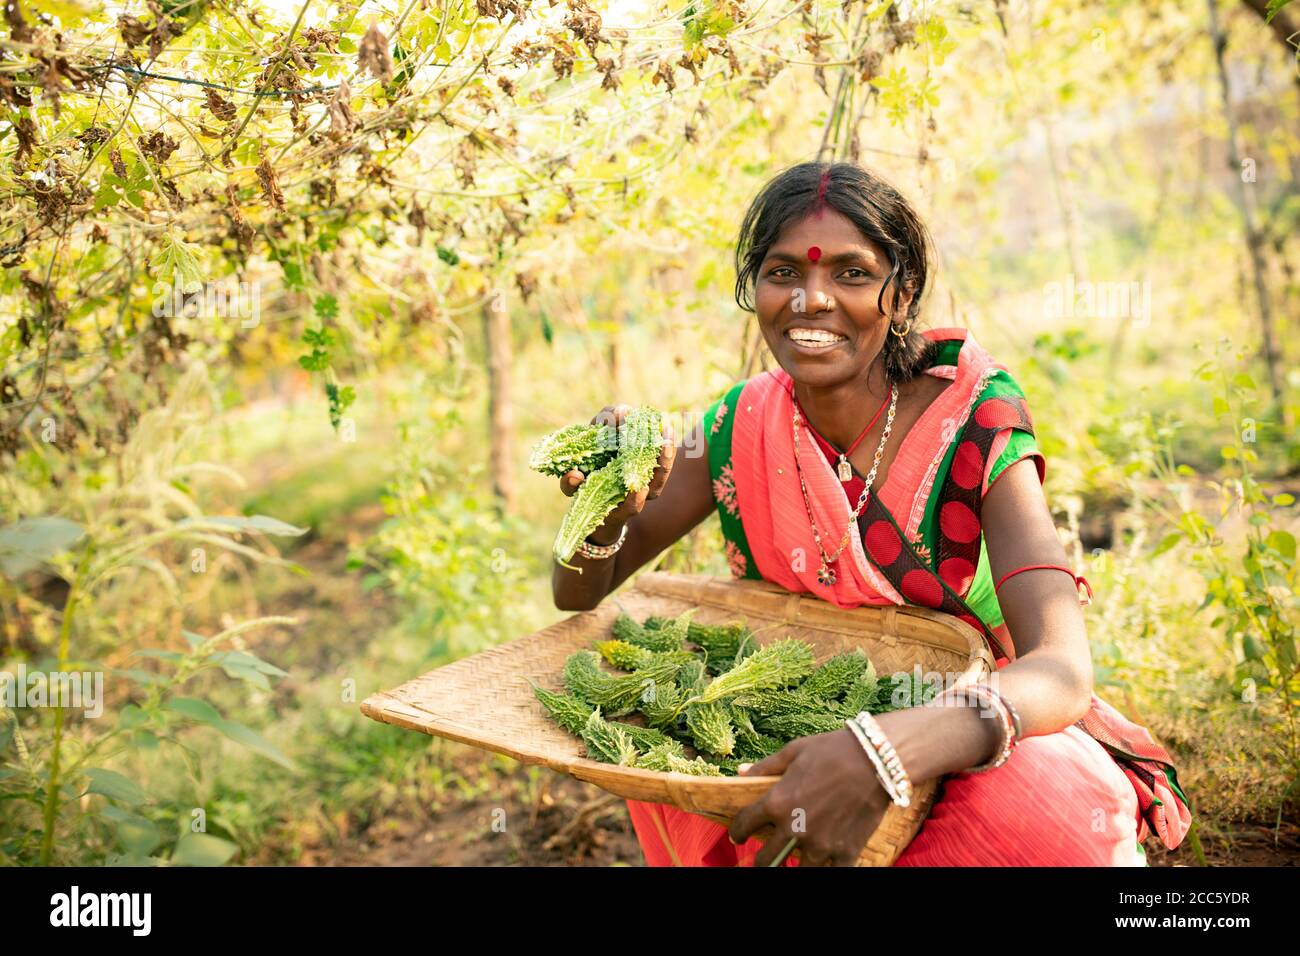 Chandrika Devi (35) harvests fresh bitter gourd on her farm in Bihar, India. Women like Chankdrika have been empowered and their livelihoods have been strengthened through Partnership Bihar, a Lutheran World Relief initiative that brings better farming techniques, high-quality seeds, improved nutrition for families, and microfinance self-help groups to communities in one of India’s poorest states.  Pradan (Professional Assistance for Development Action) / Partnership Bihar project.  November 21, 2019 - Banka District, Bihar State, India. Photo by Jake Lyell for Lutheran World Relief. Stock Photo